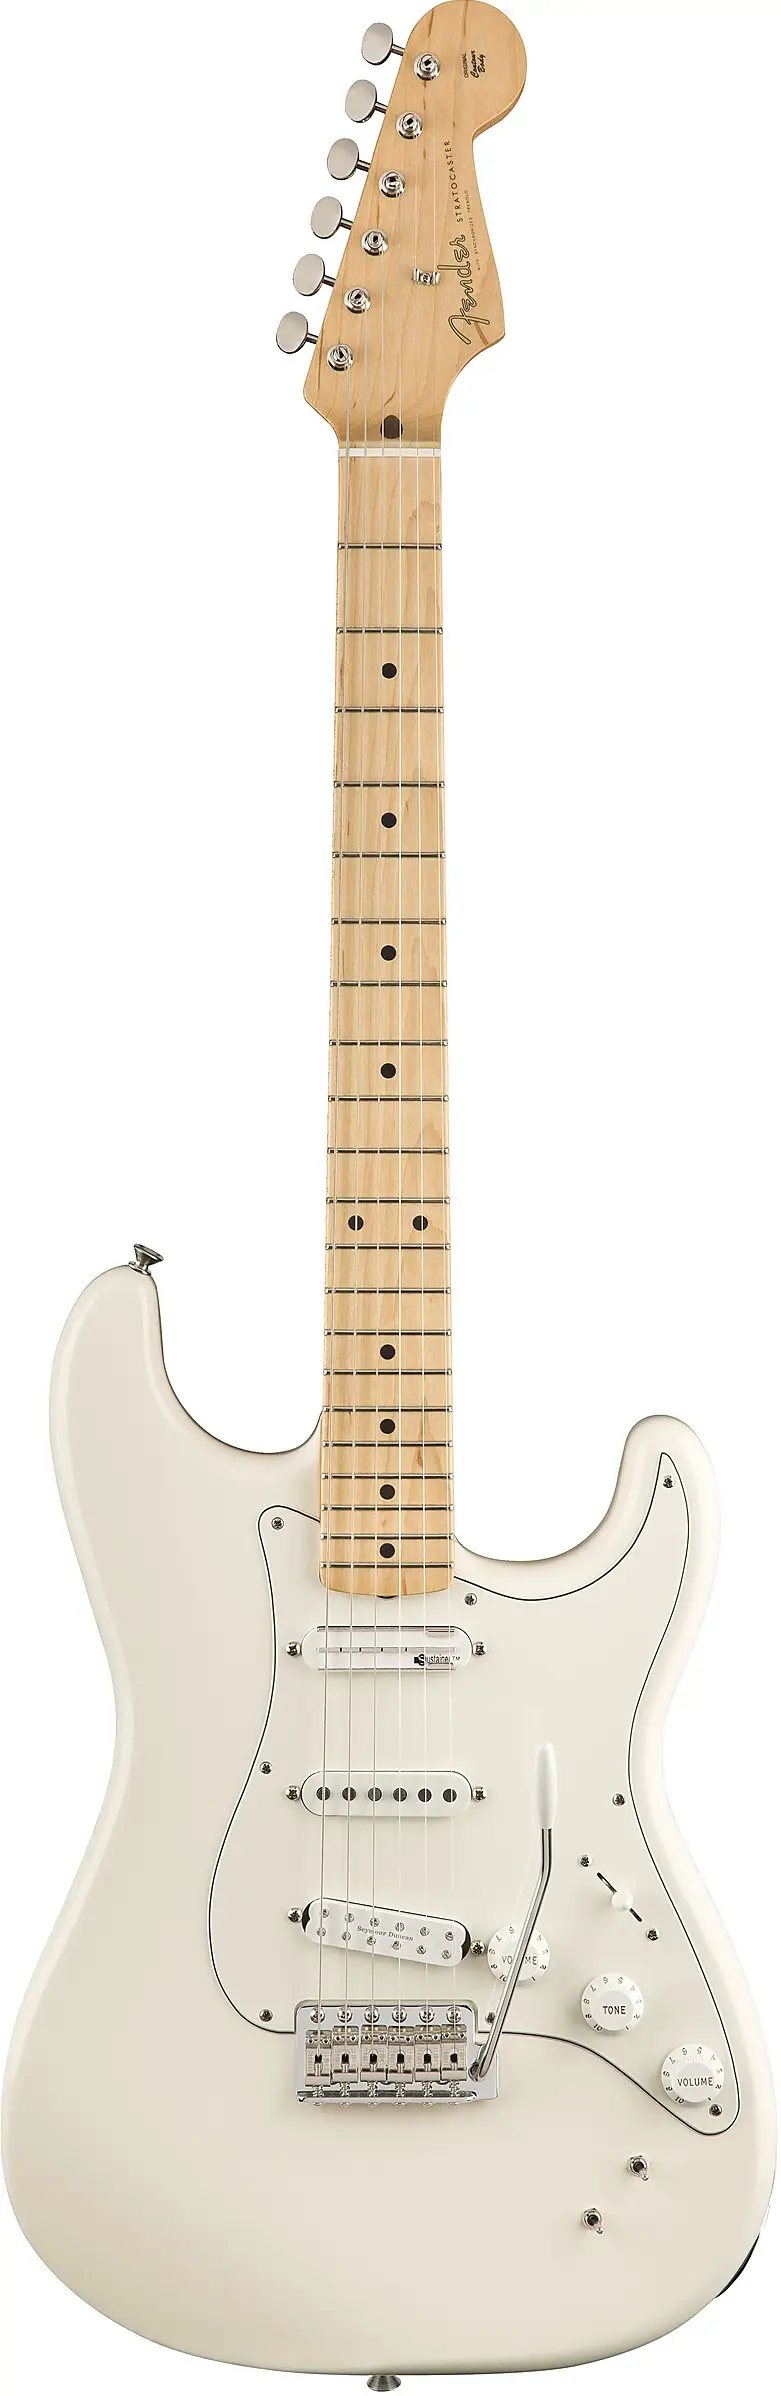 EOB Sustainer Stratocaster by Fender